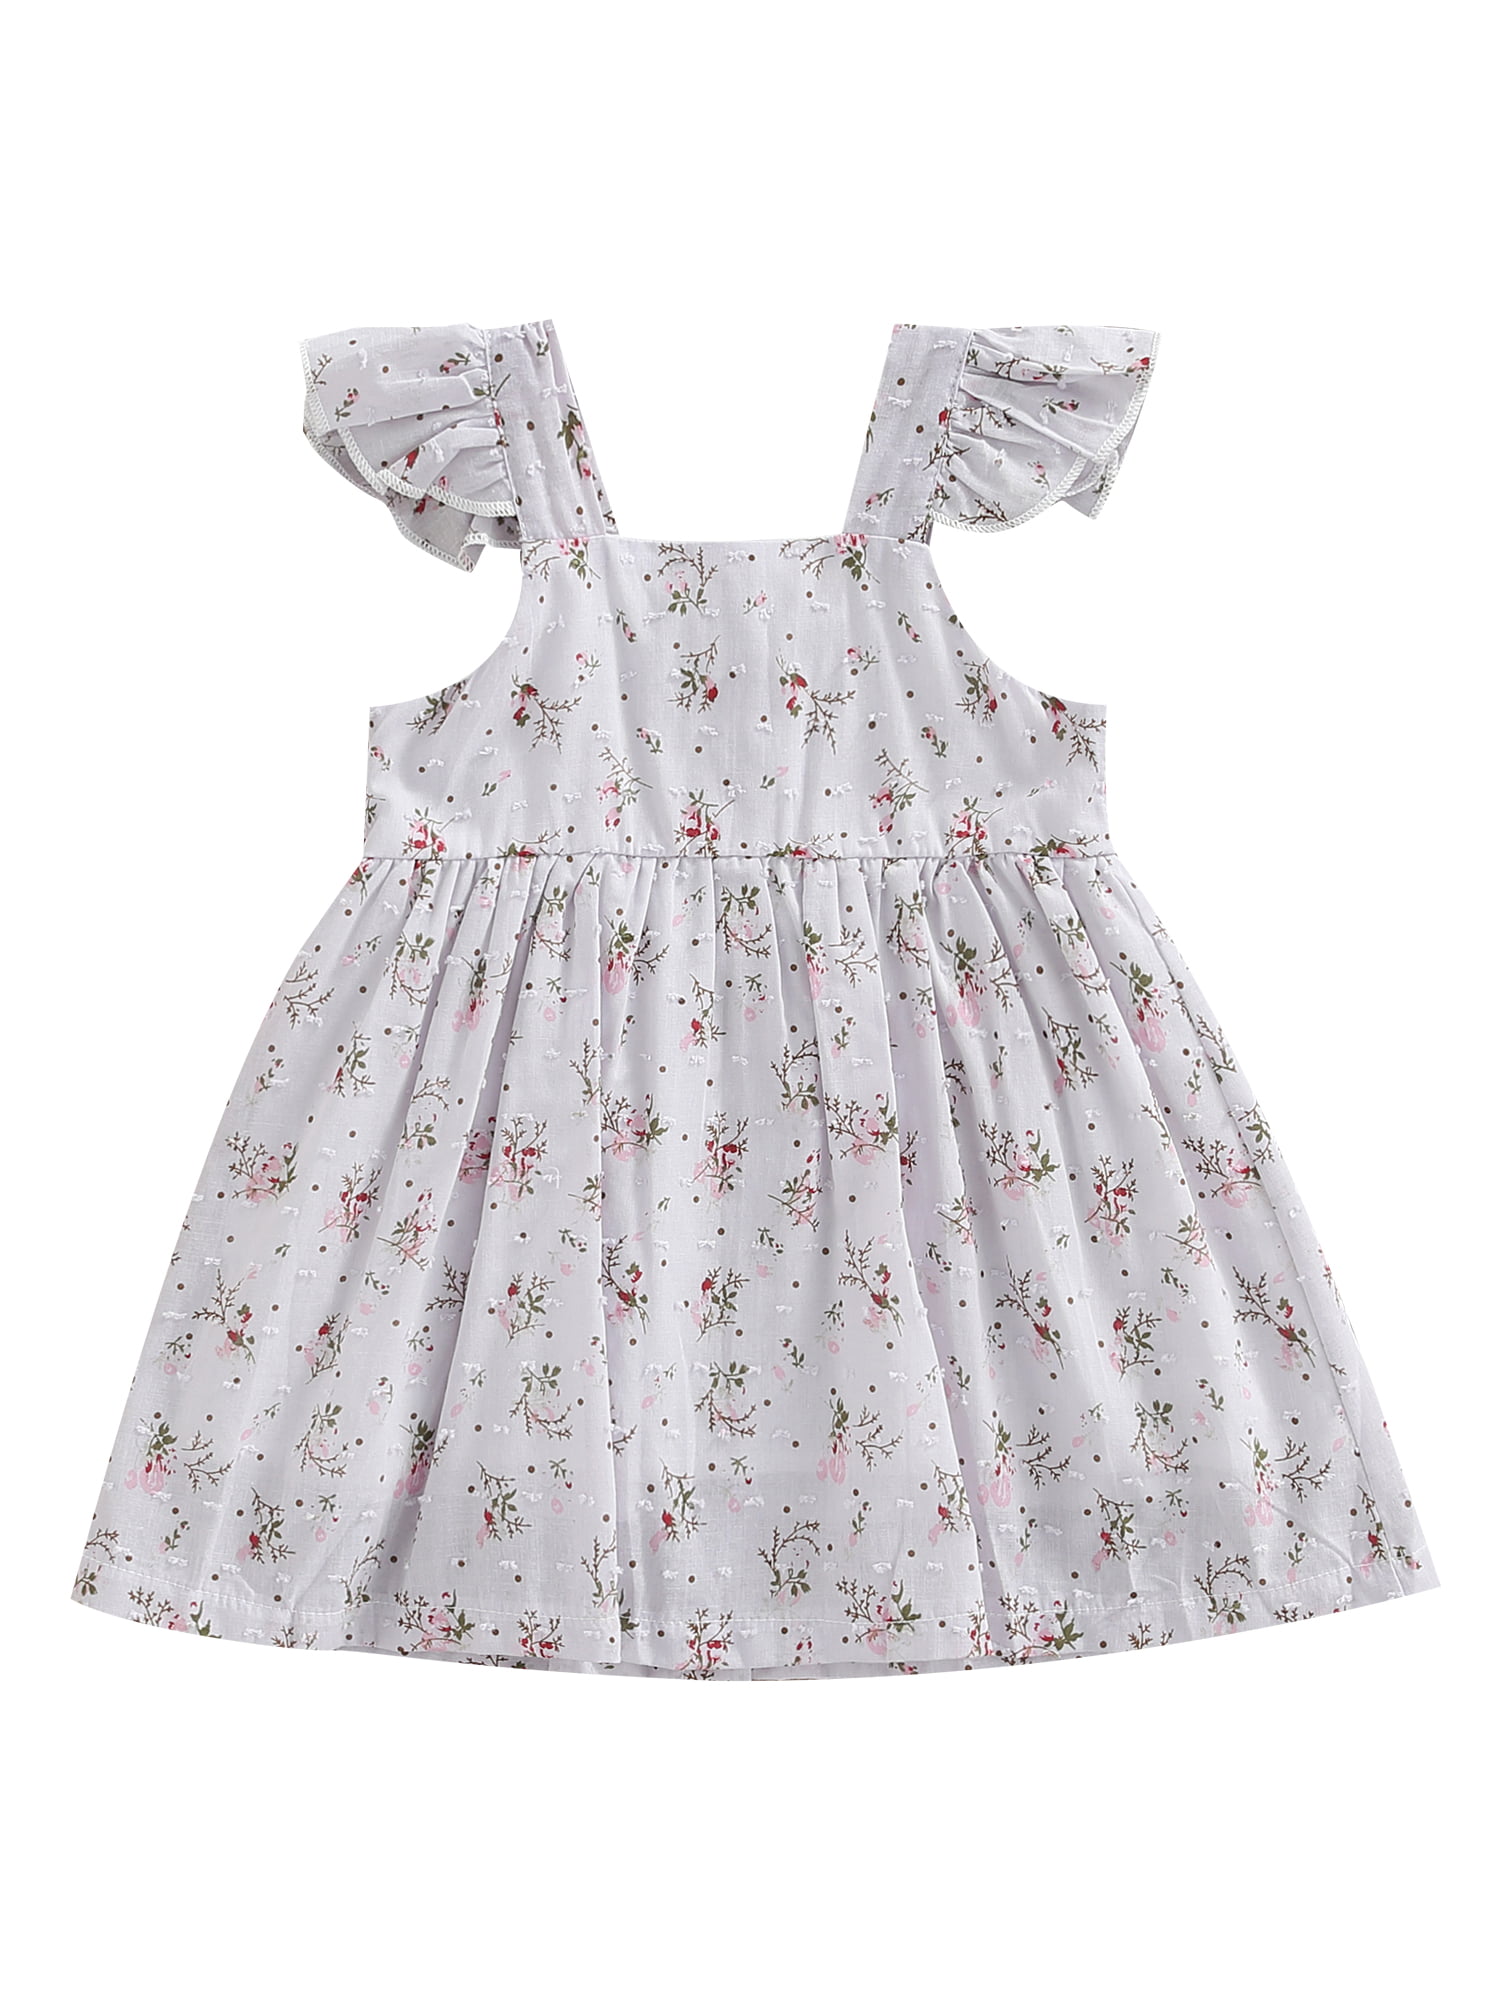 Mothercare mothercare 12-18 months girls dress 